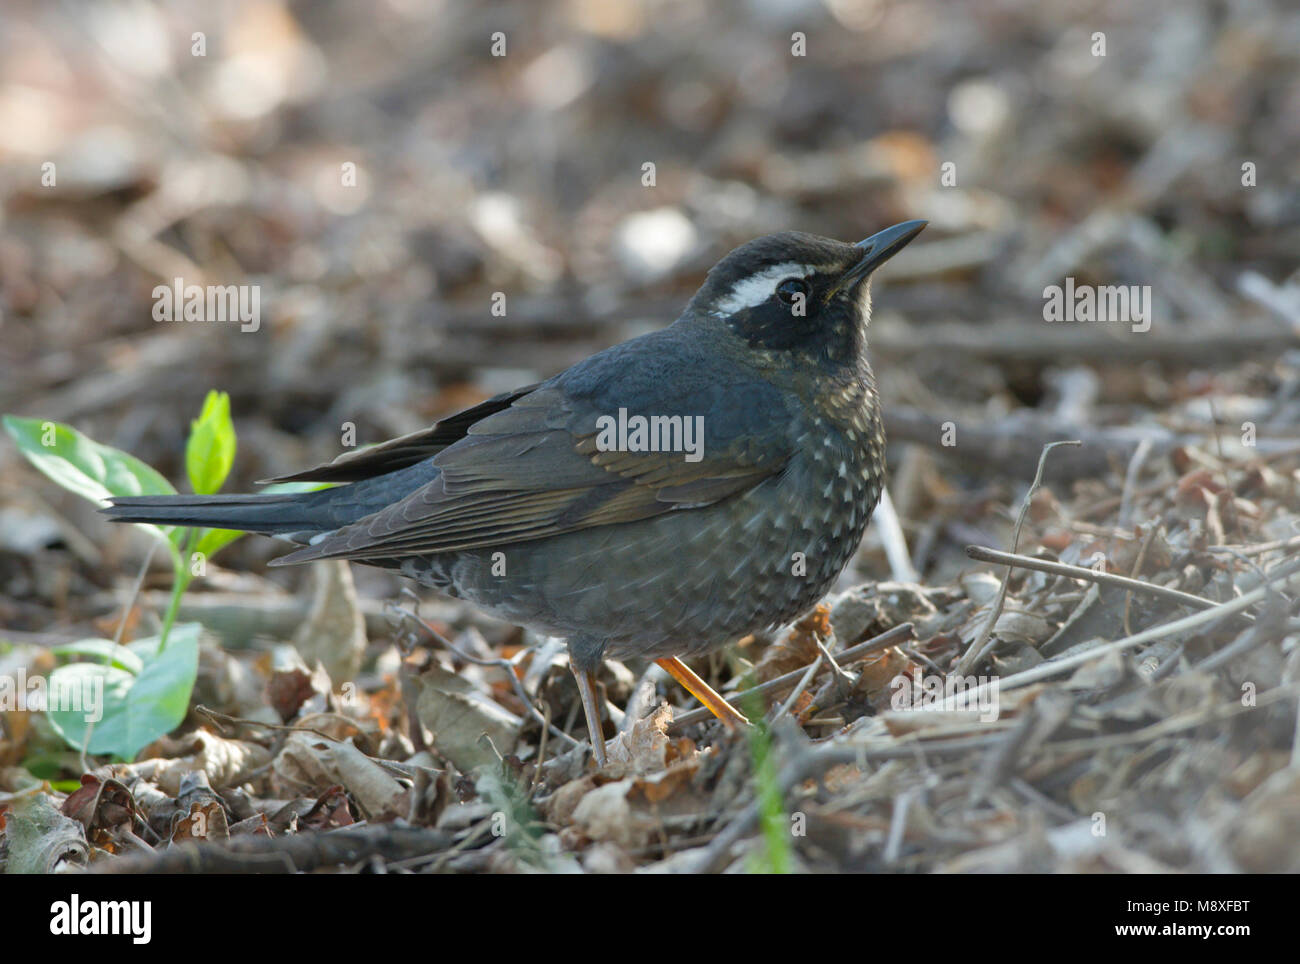 Immature male Siberian Thrush foraging on ground in forest China, Jong mannetje Siberische Lijster foeragerend op de grond in bos China Stock Photo